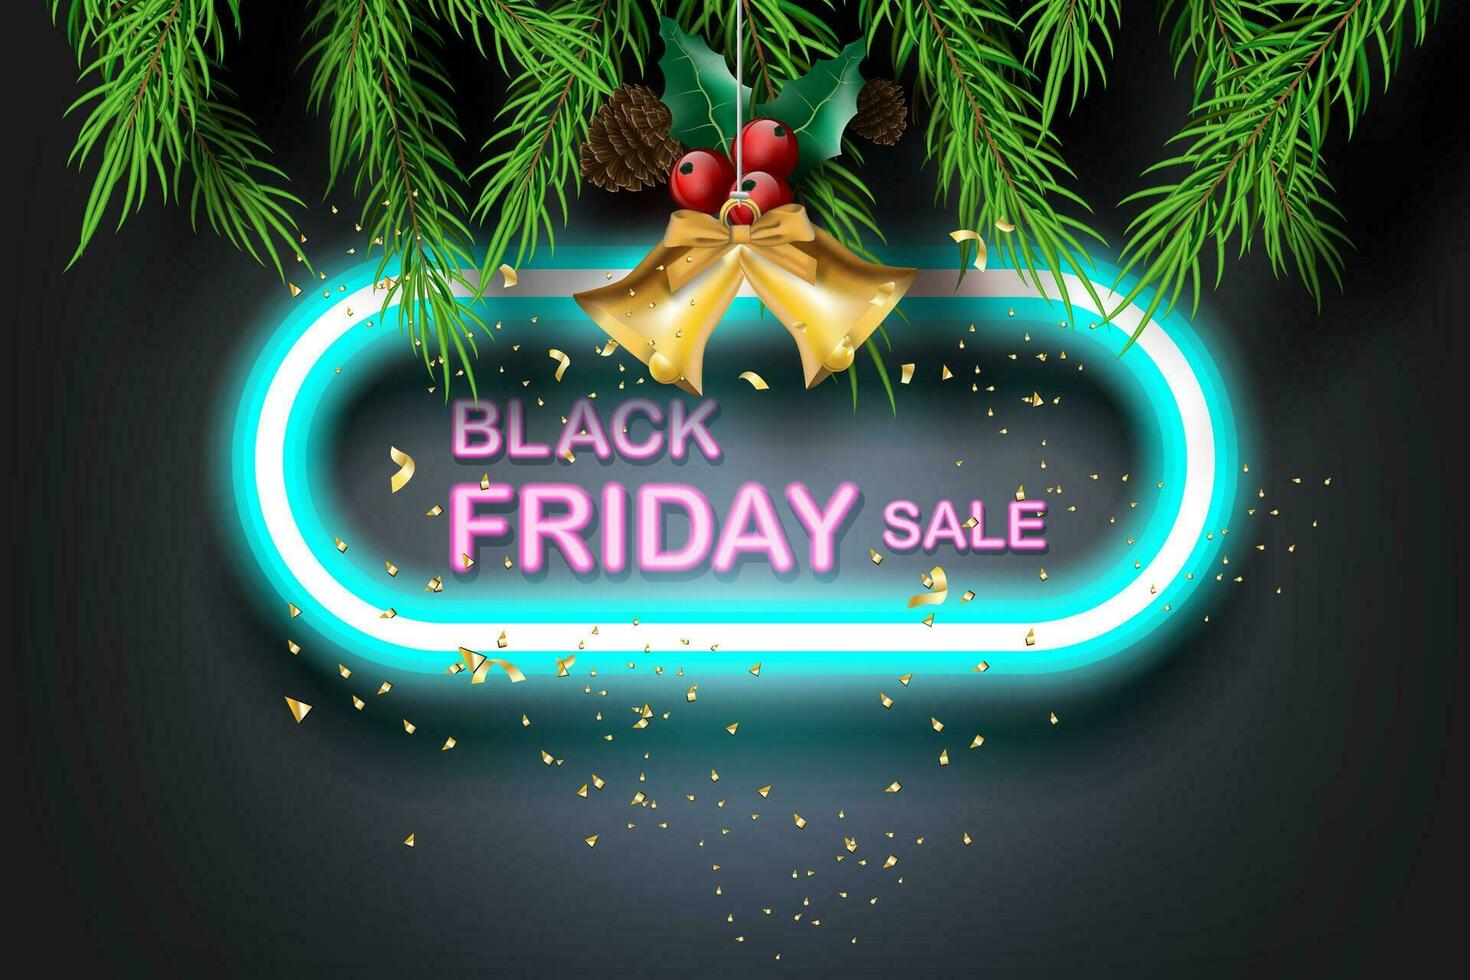 Black Friday sale with branch pine tree on bell and gold glitter background.Neon light banner.Creative Minimal Top view style.Festival marketing promotion season.Special offer card Vector illustration